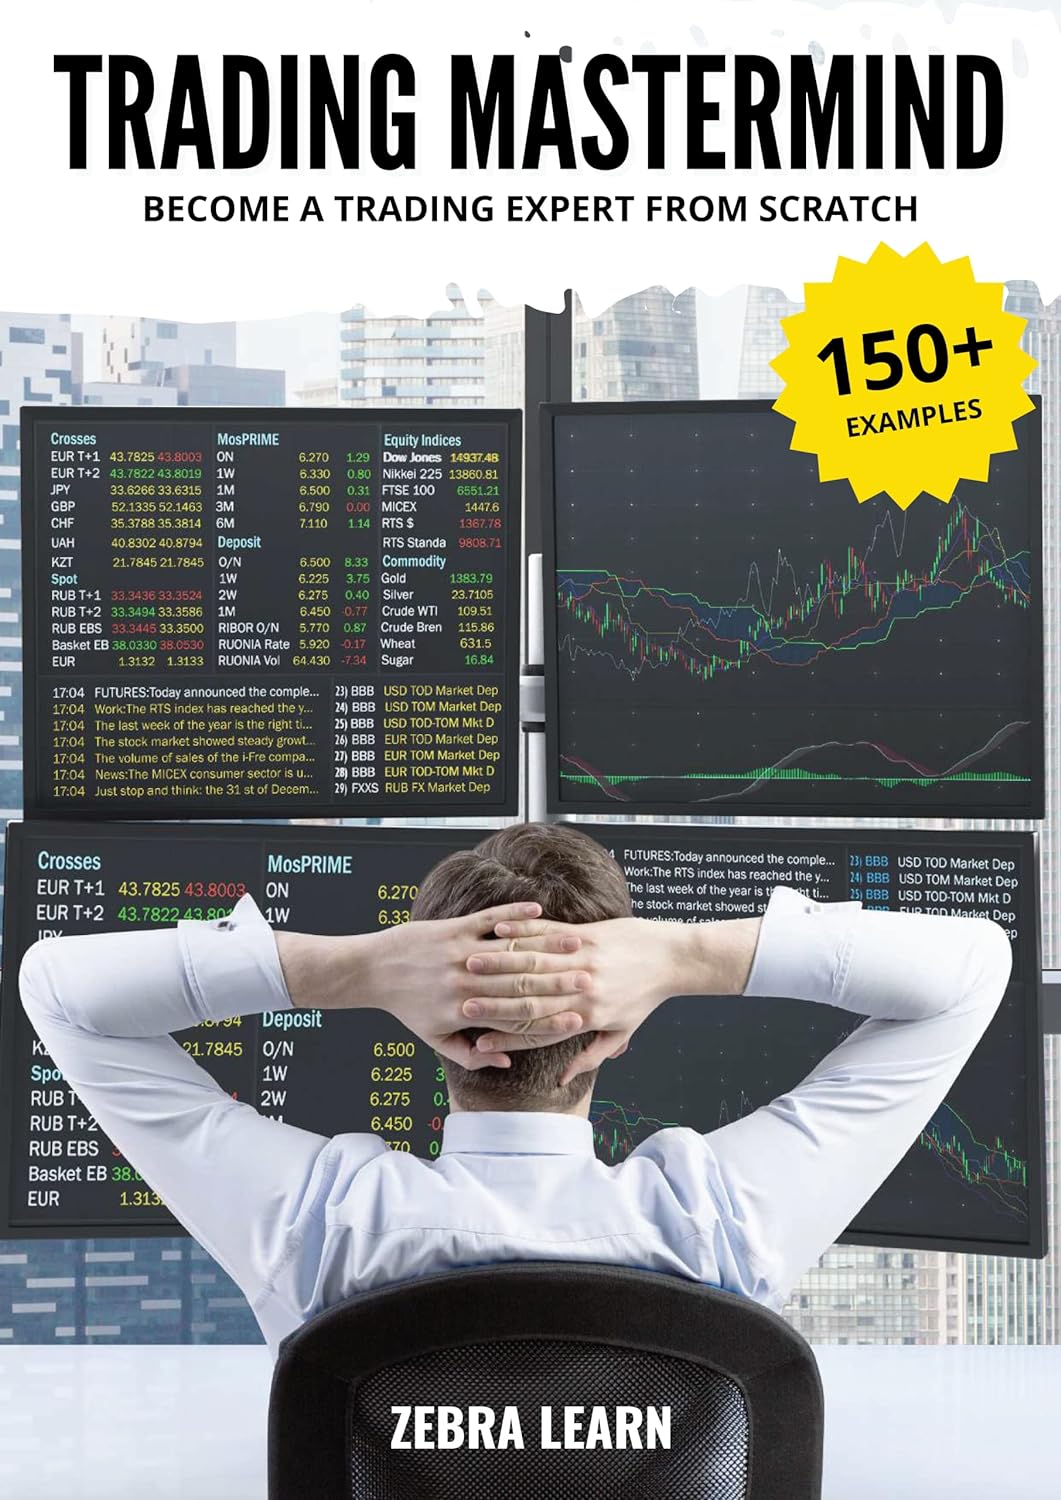 Trading Mastermind Book-Become a Trading Expert From Scratch-Zebra Learn-Stumbit Finance